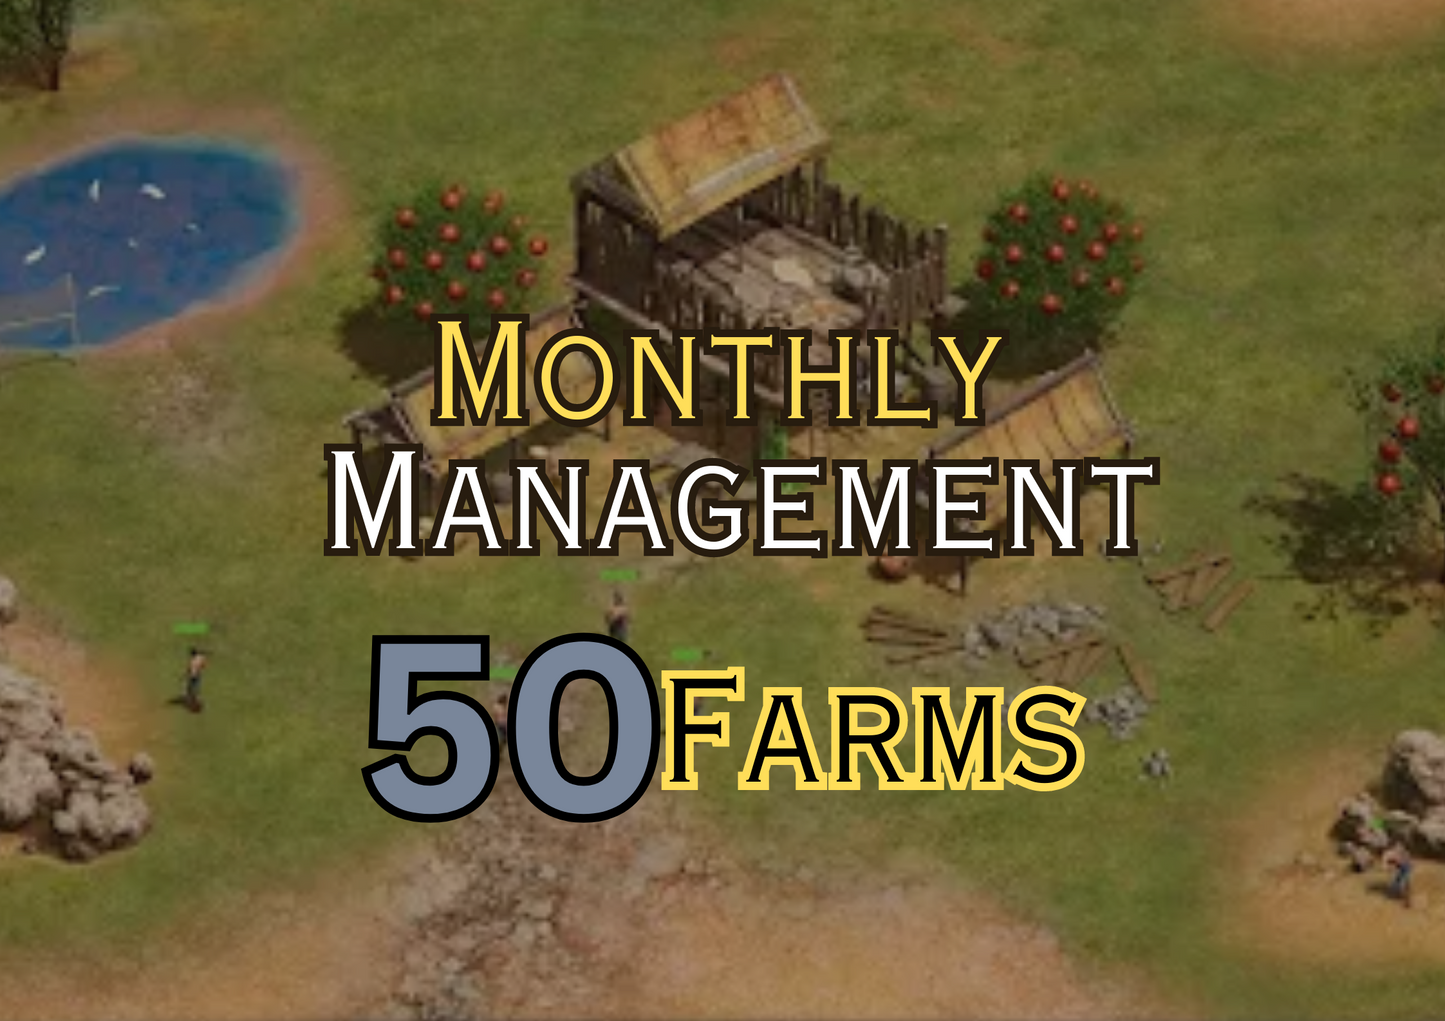 Monthly Management for 50 farms